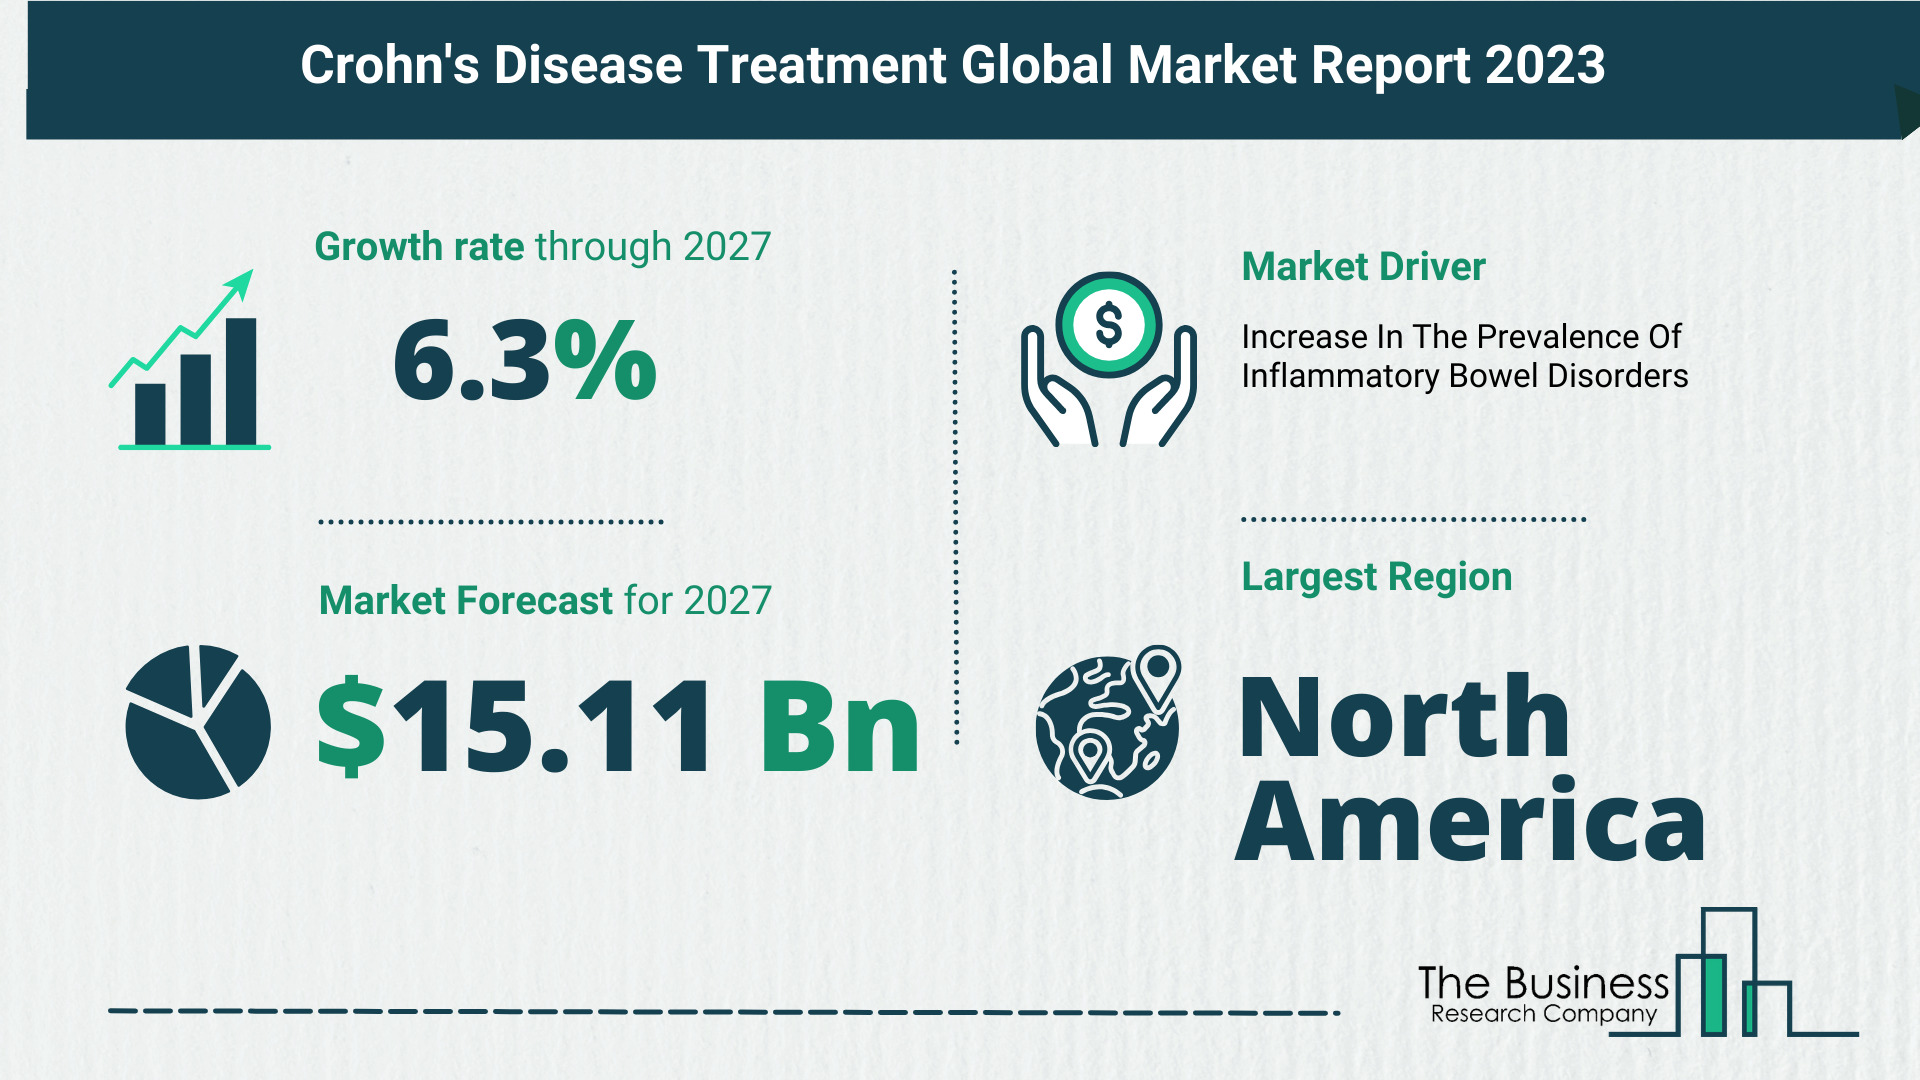 Global Crohn’s Disease Treatment Market Analysis 2023: Size, Share, And Key Trends